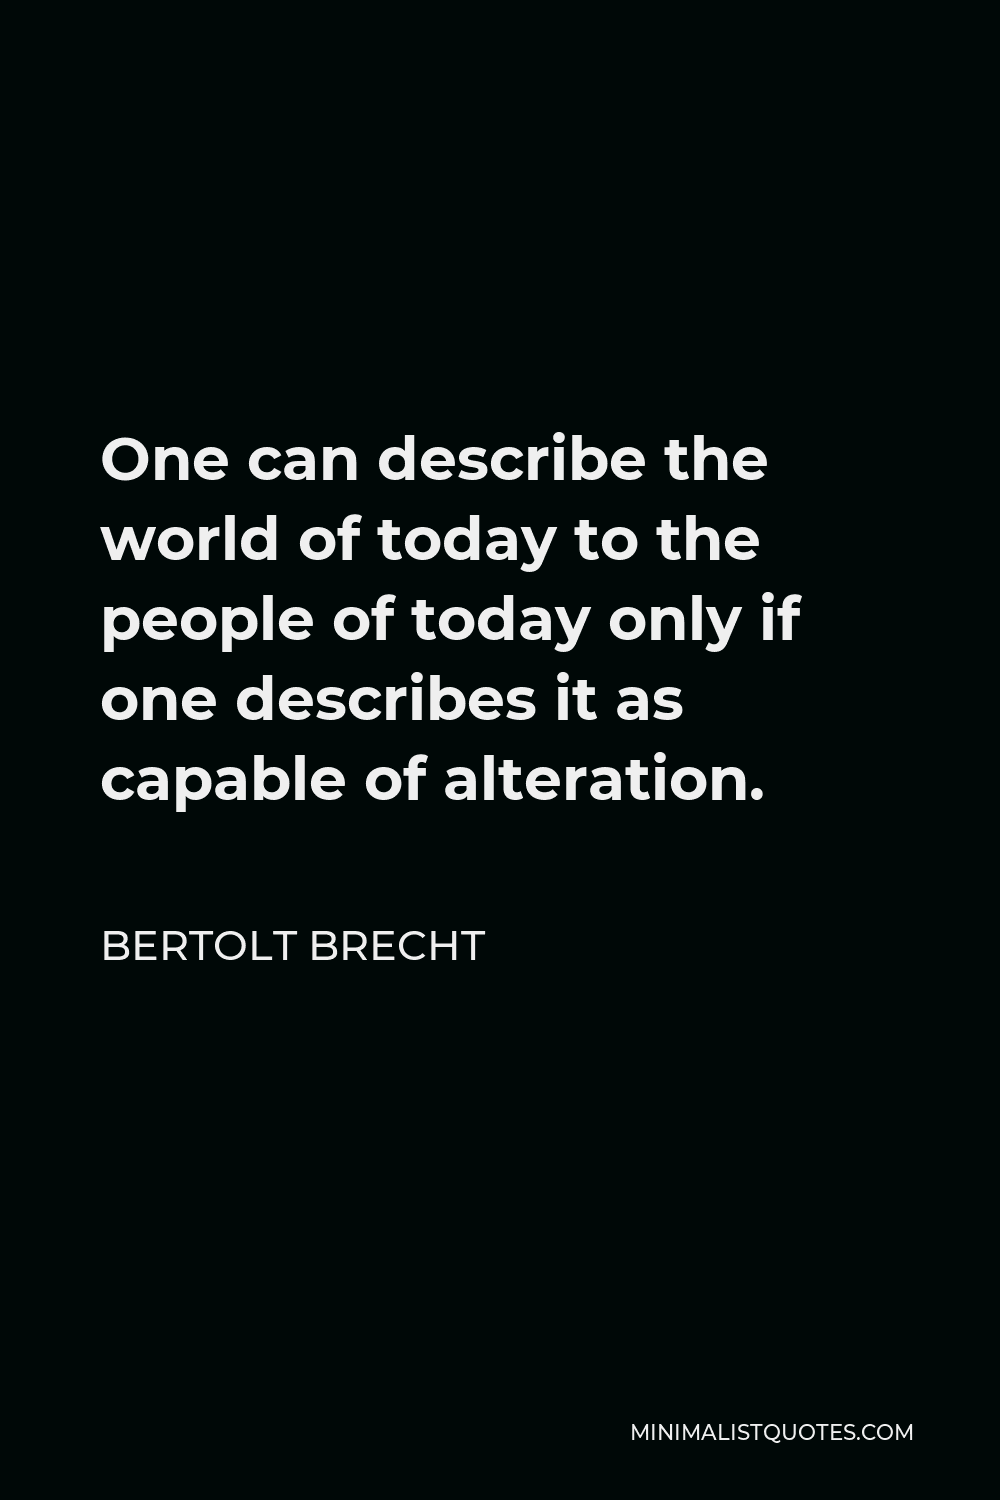 Bertolt Brecht Quote - One can describe the world of today to the people of today only if one describes it as capable of alteration.